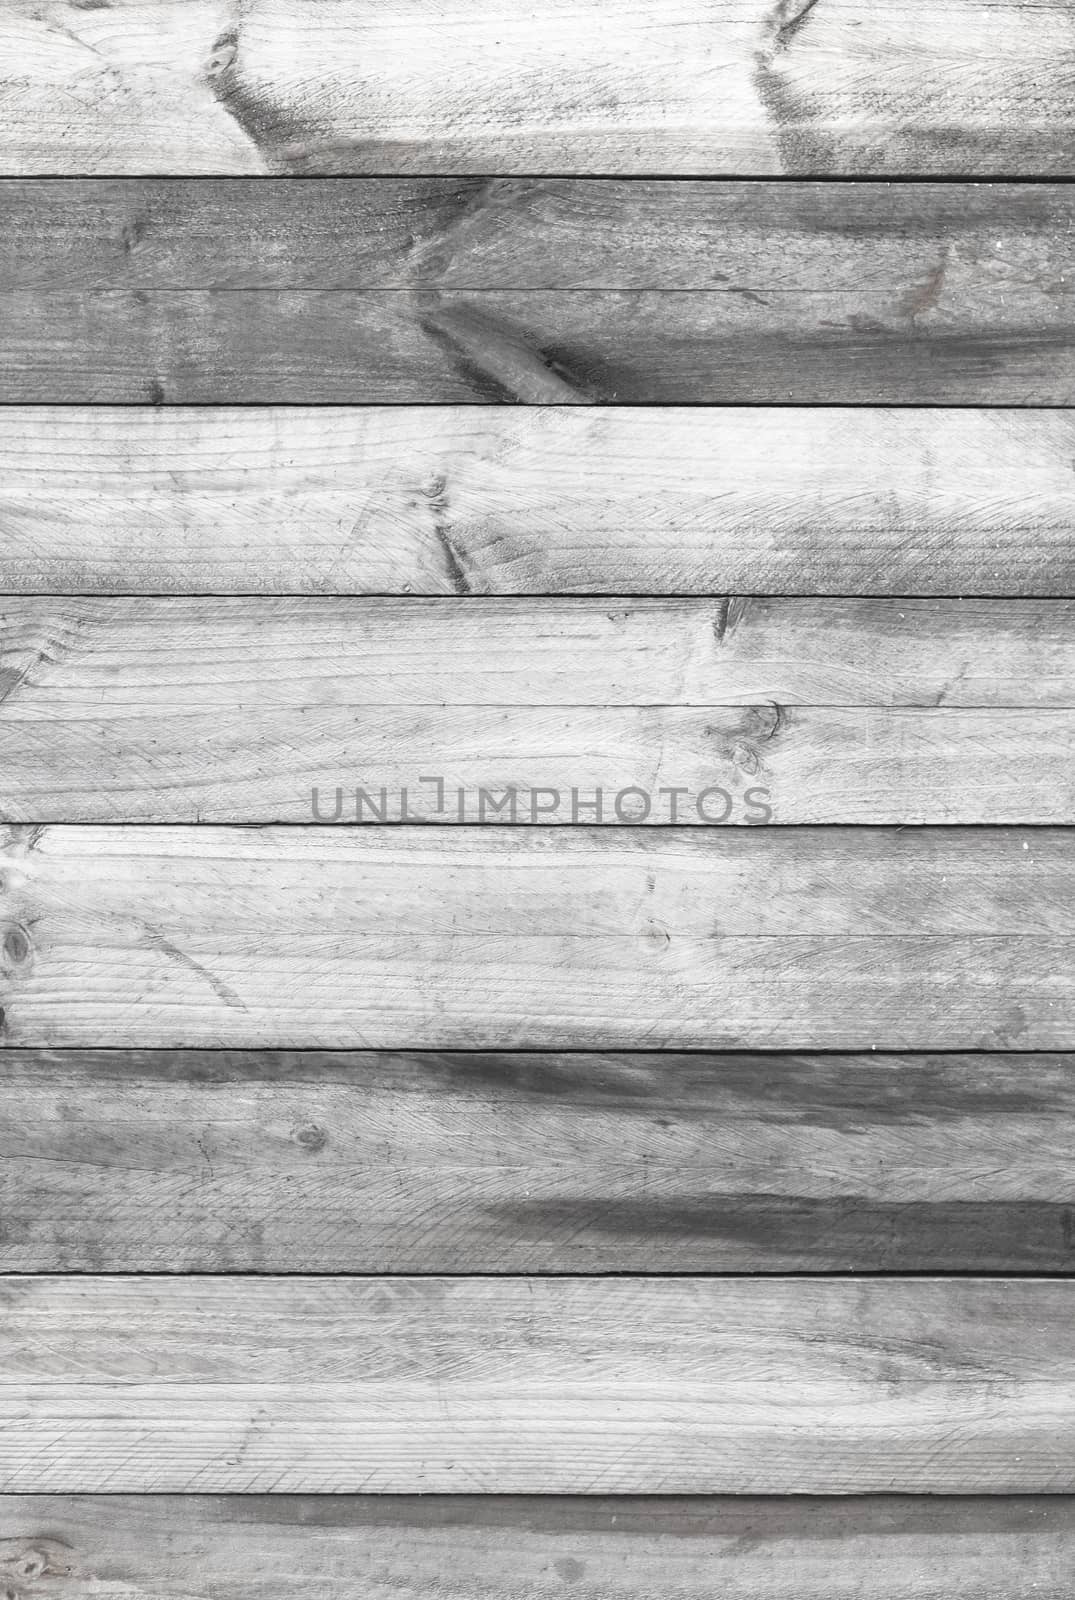 monochrome wood plank wall texture background.